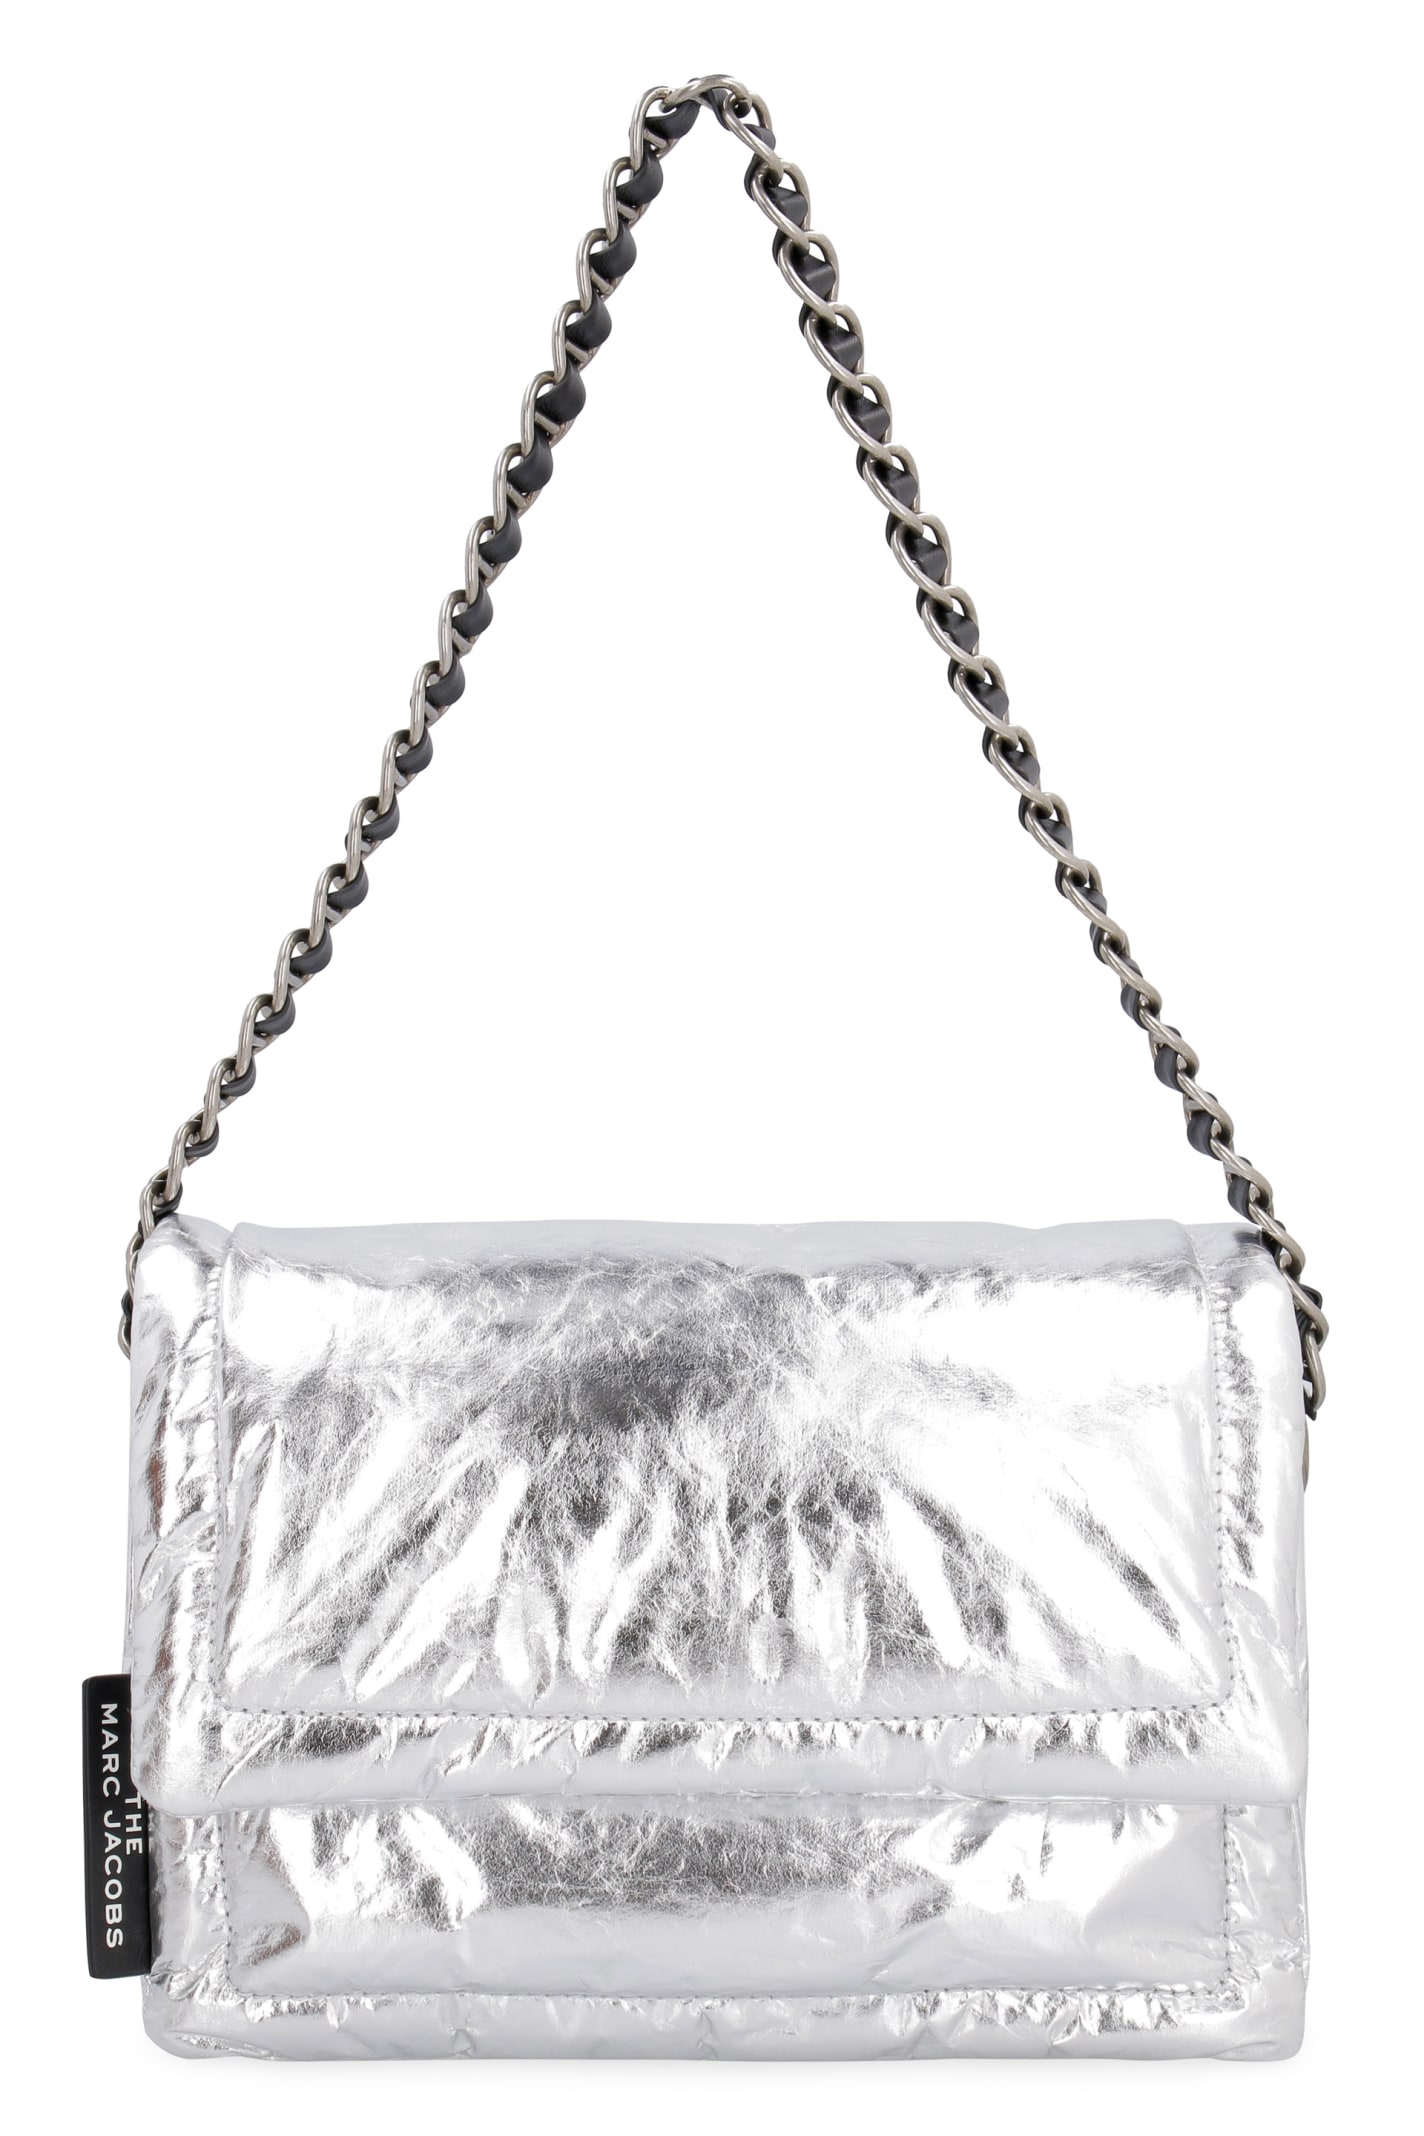 MARC JACOBS THE PILLOW METALLIC LEATHER SHOULDER BAG,11263751